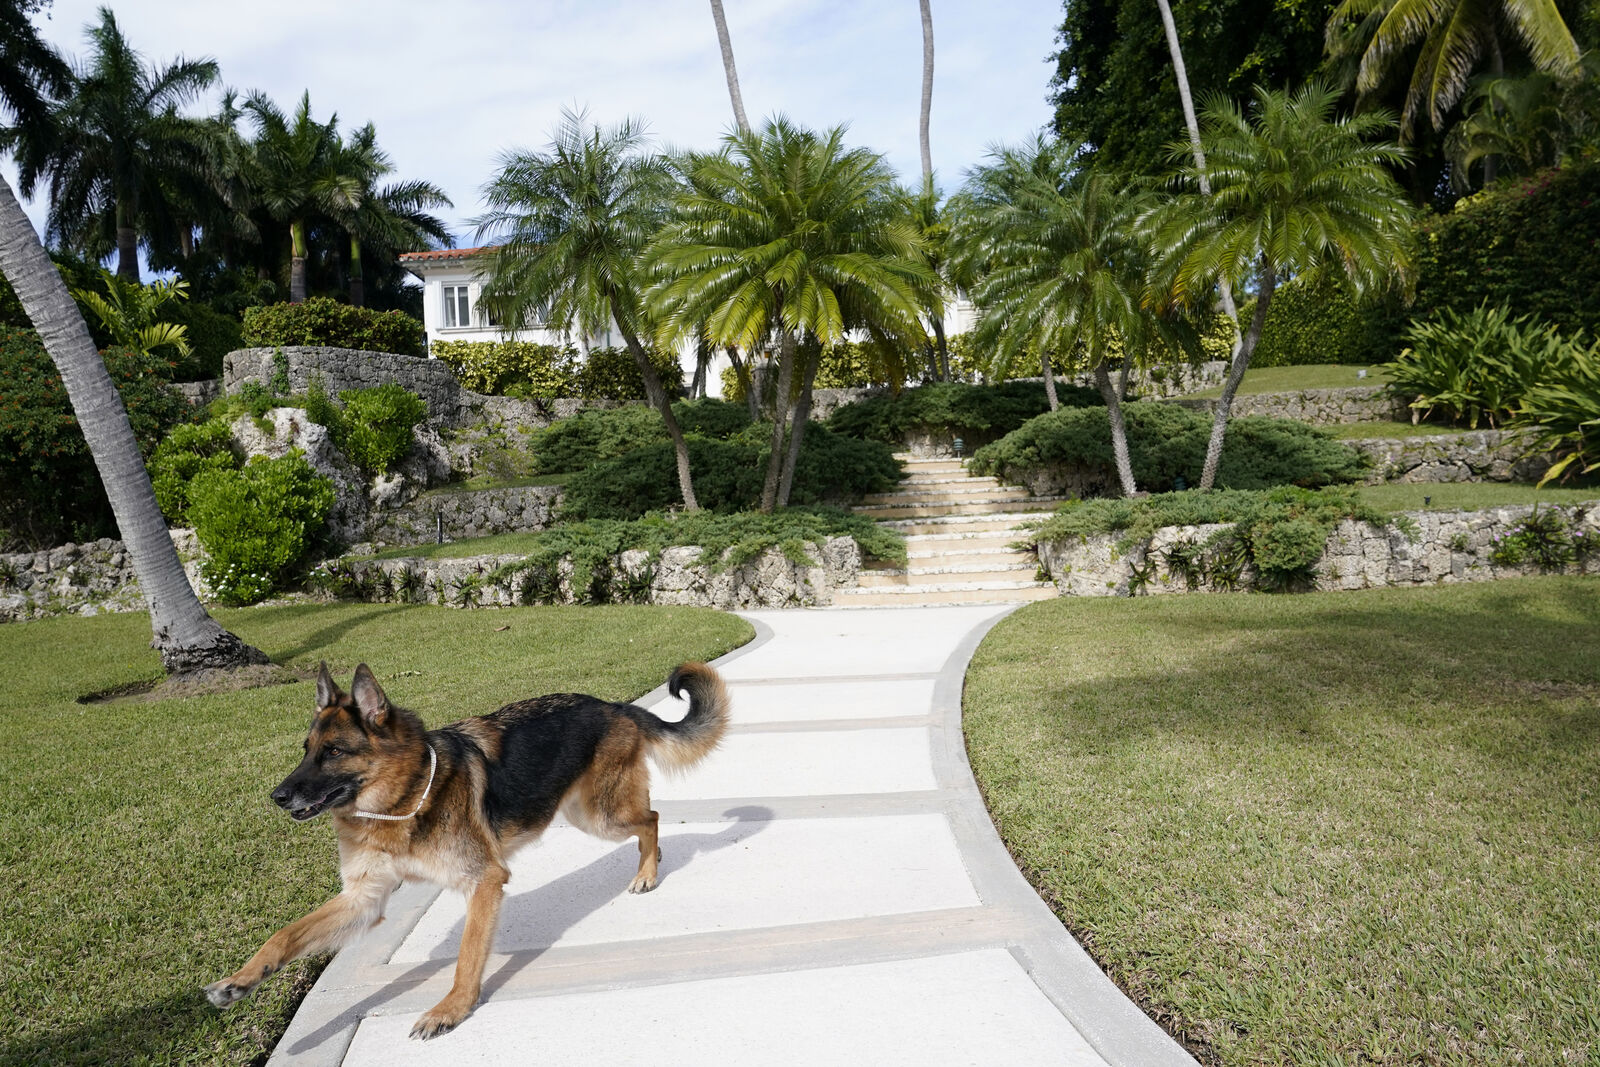 German Shepherd Gunther VI runs on the grounds of a house formally owned by pop star Madonna, Monday, Nov. 15, 2021, in Miami. Gunther VI inherited his vast fortune, including the 9-bedroom waterfront home once owned by the Material Girl from his grandfather Gunther IV. The estate, purchased 20 years ago from the pop star, was listed for sale Wednesday. (AP Photo/Lynne Sladky)